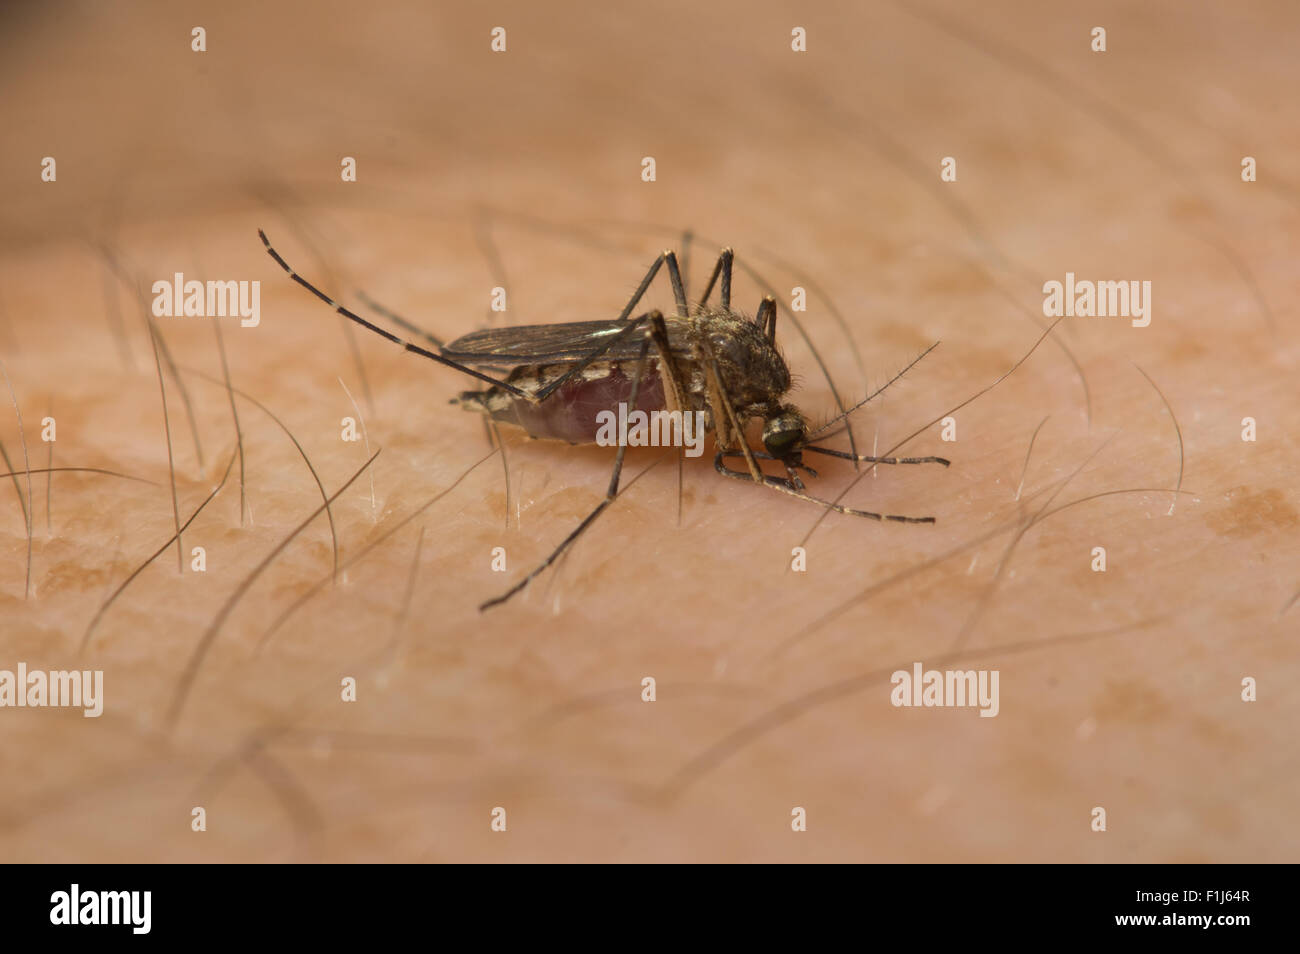 A parasitic mosquito bites the freckled arm of a person.  Some mosquitoes carry malaria and other diseases. Stock Photo